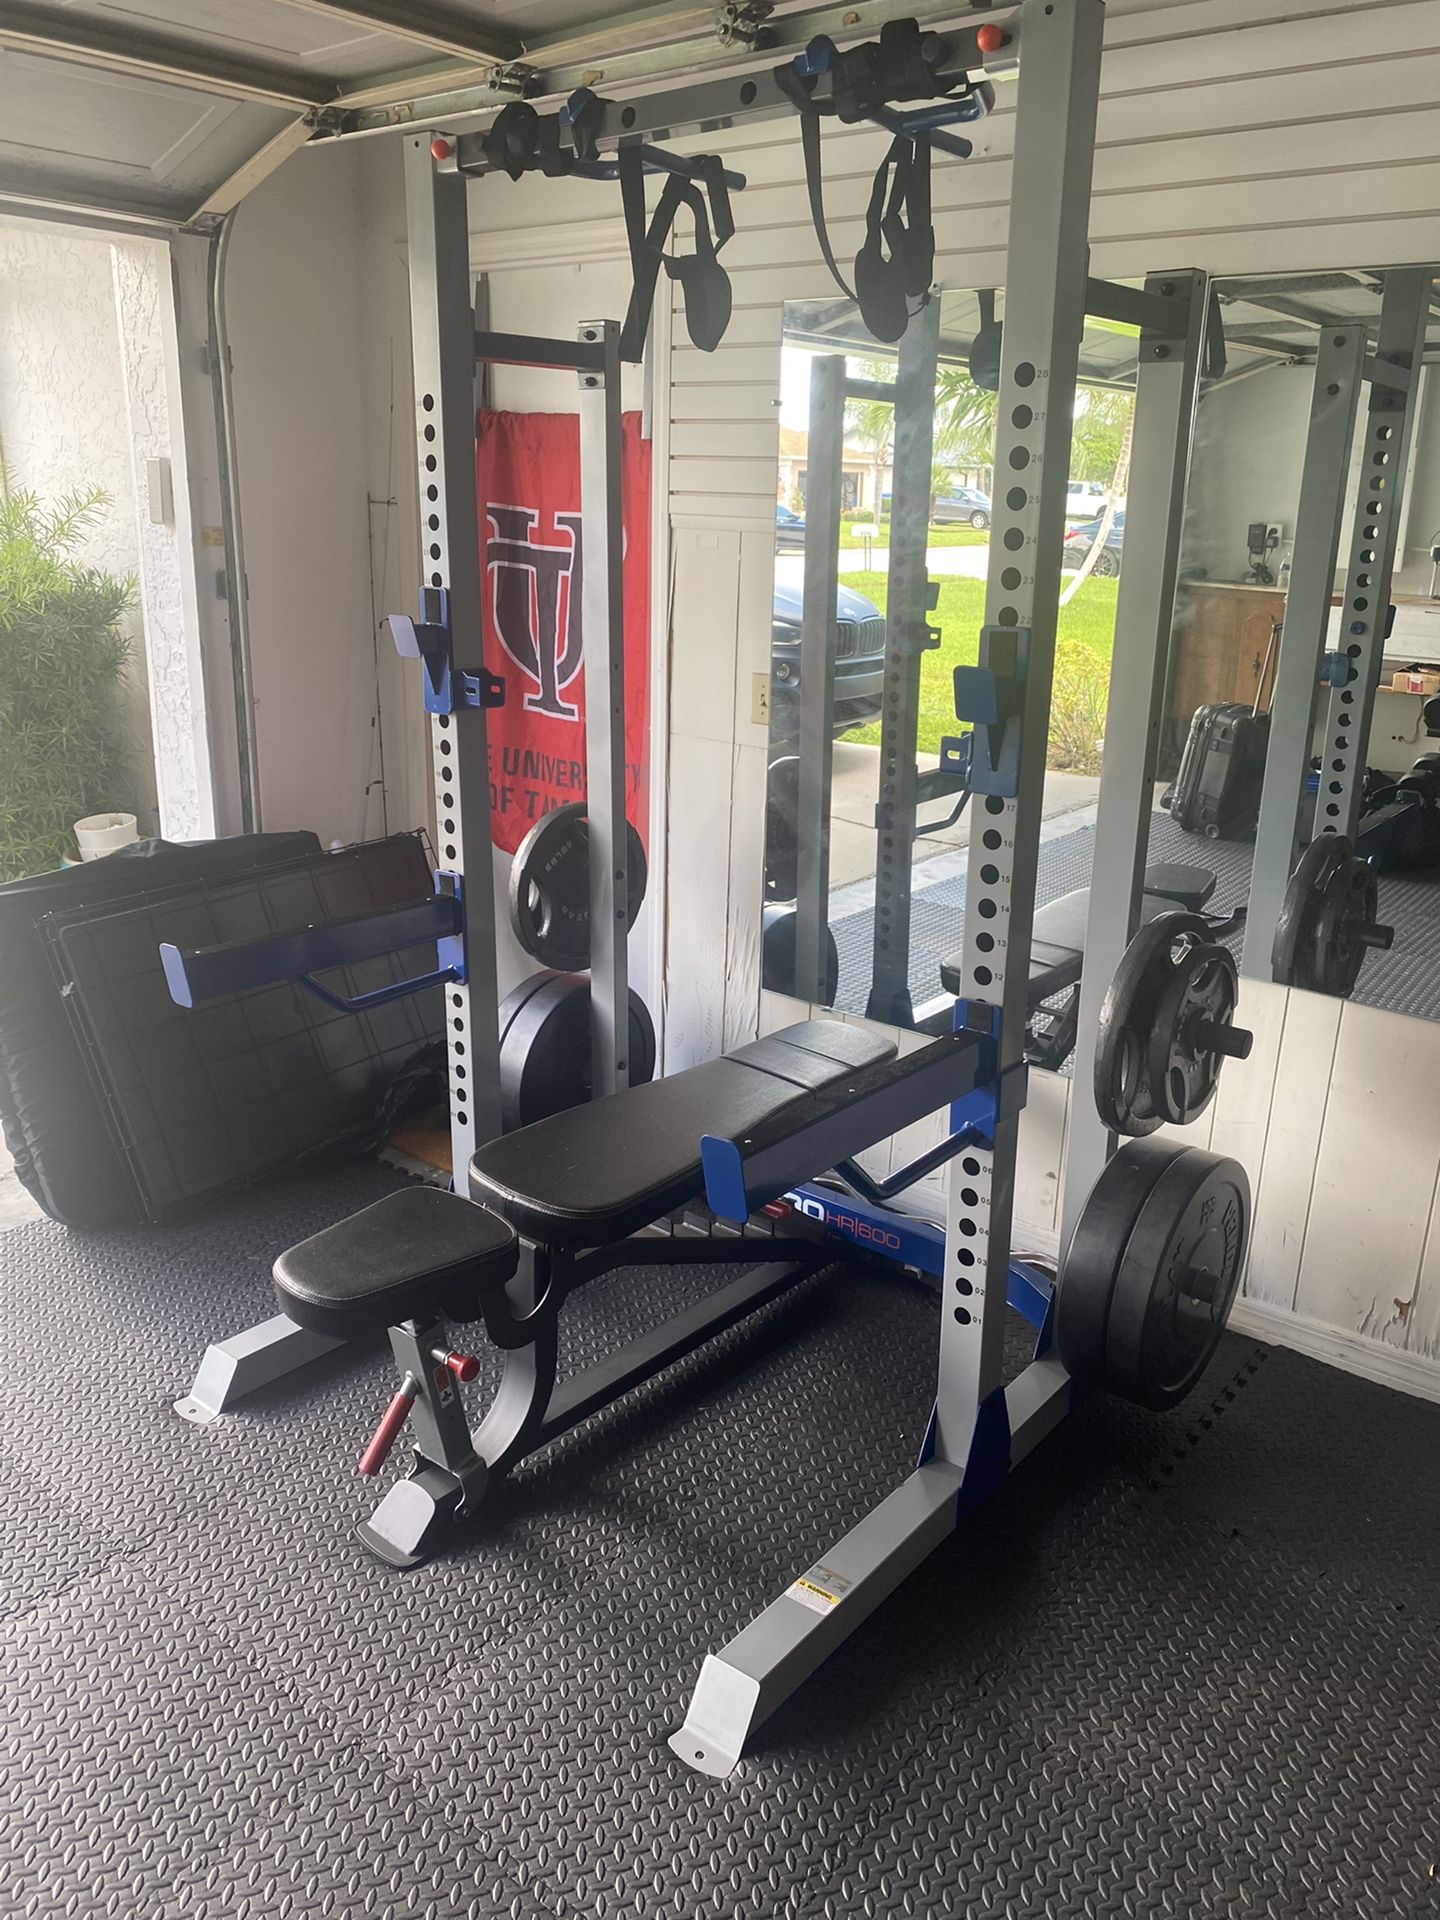 Squat Rack, 5-50lb Dumbbells, DB Rack, Dual Stack Canle Machine, Free Weight Bench, Barbell Weights